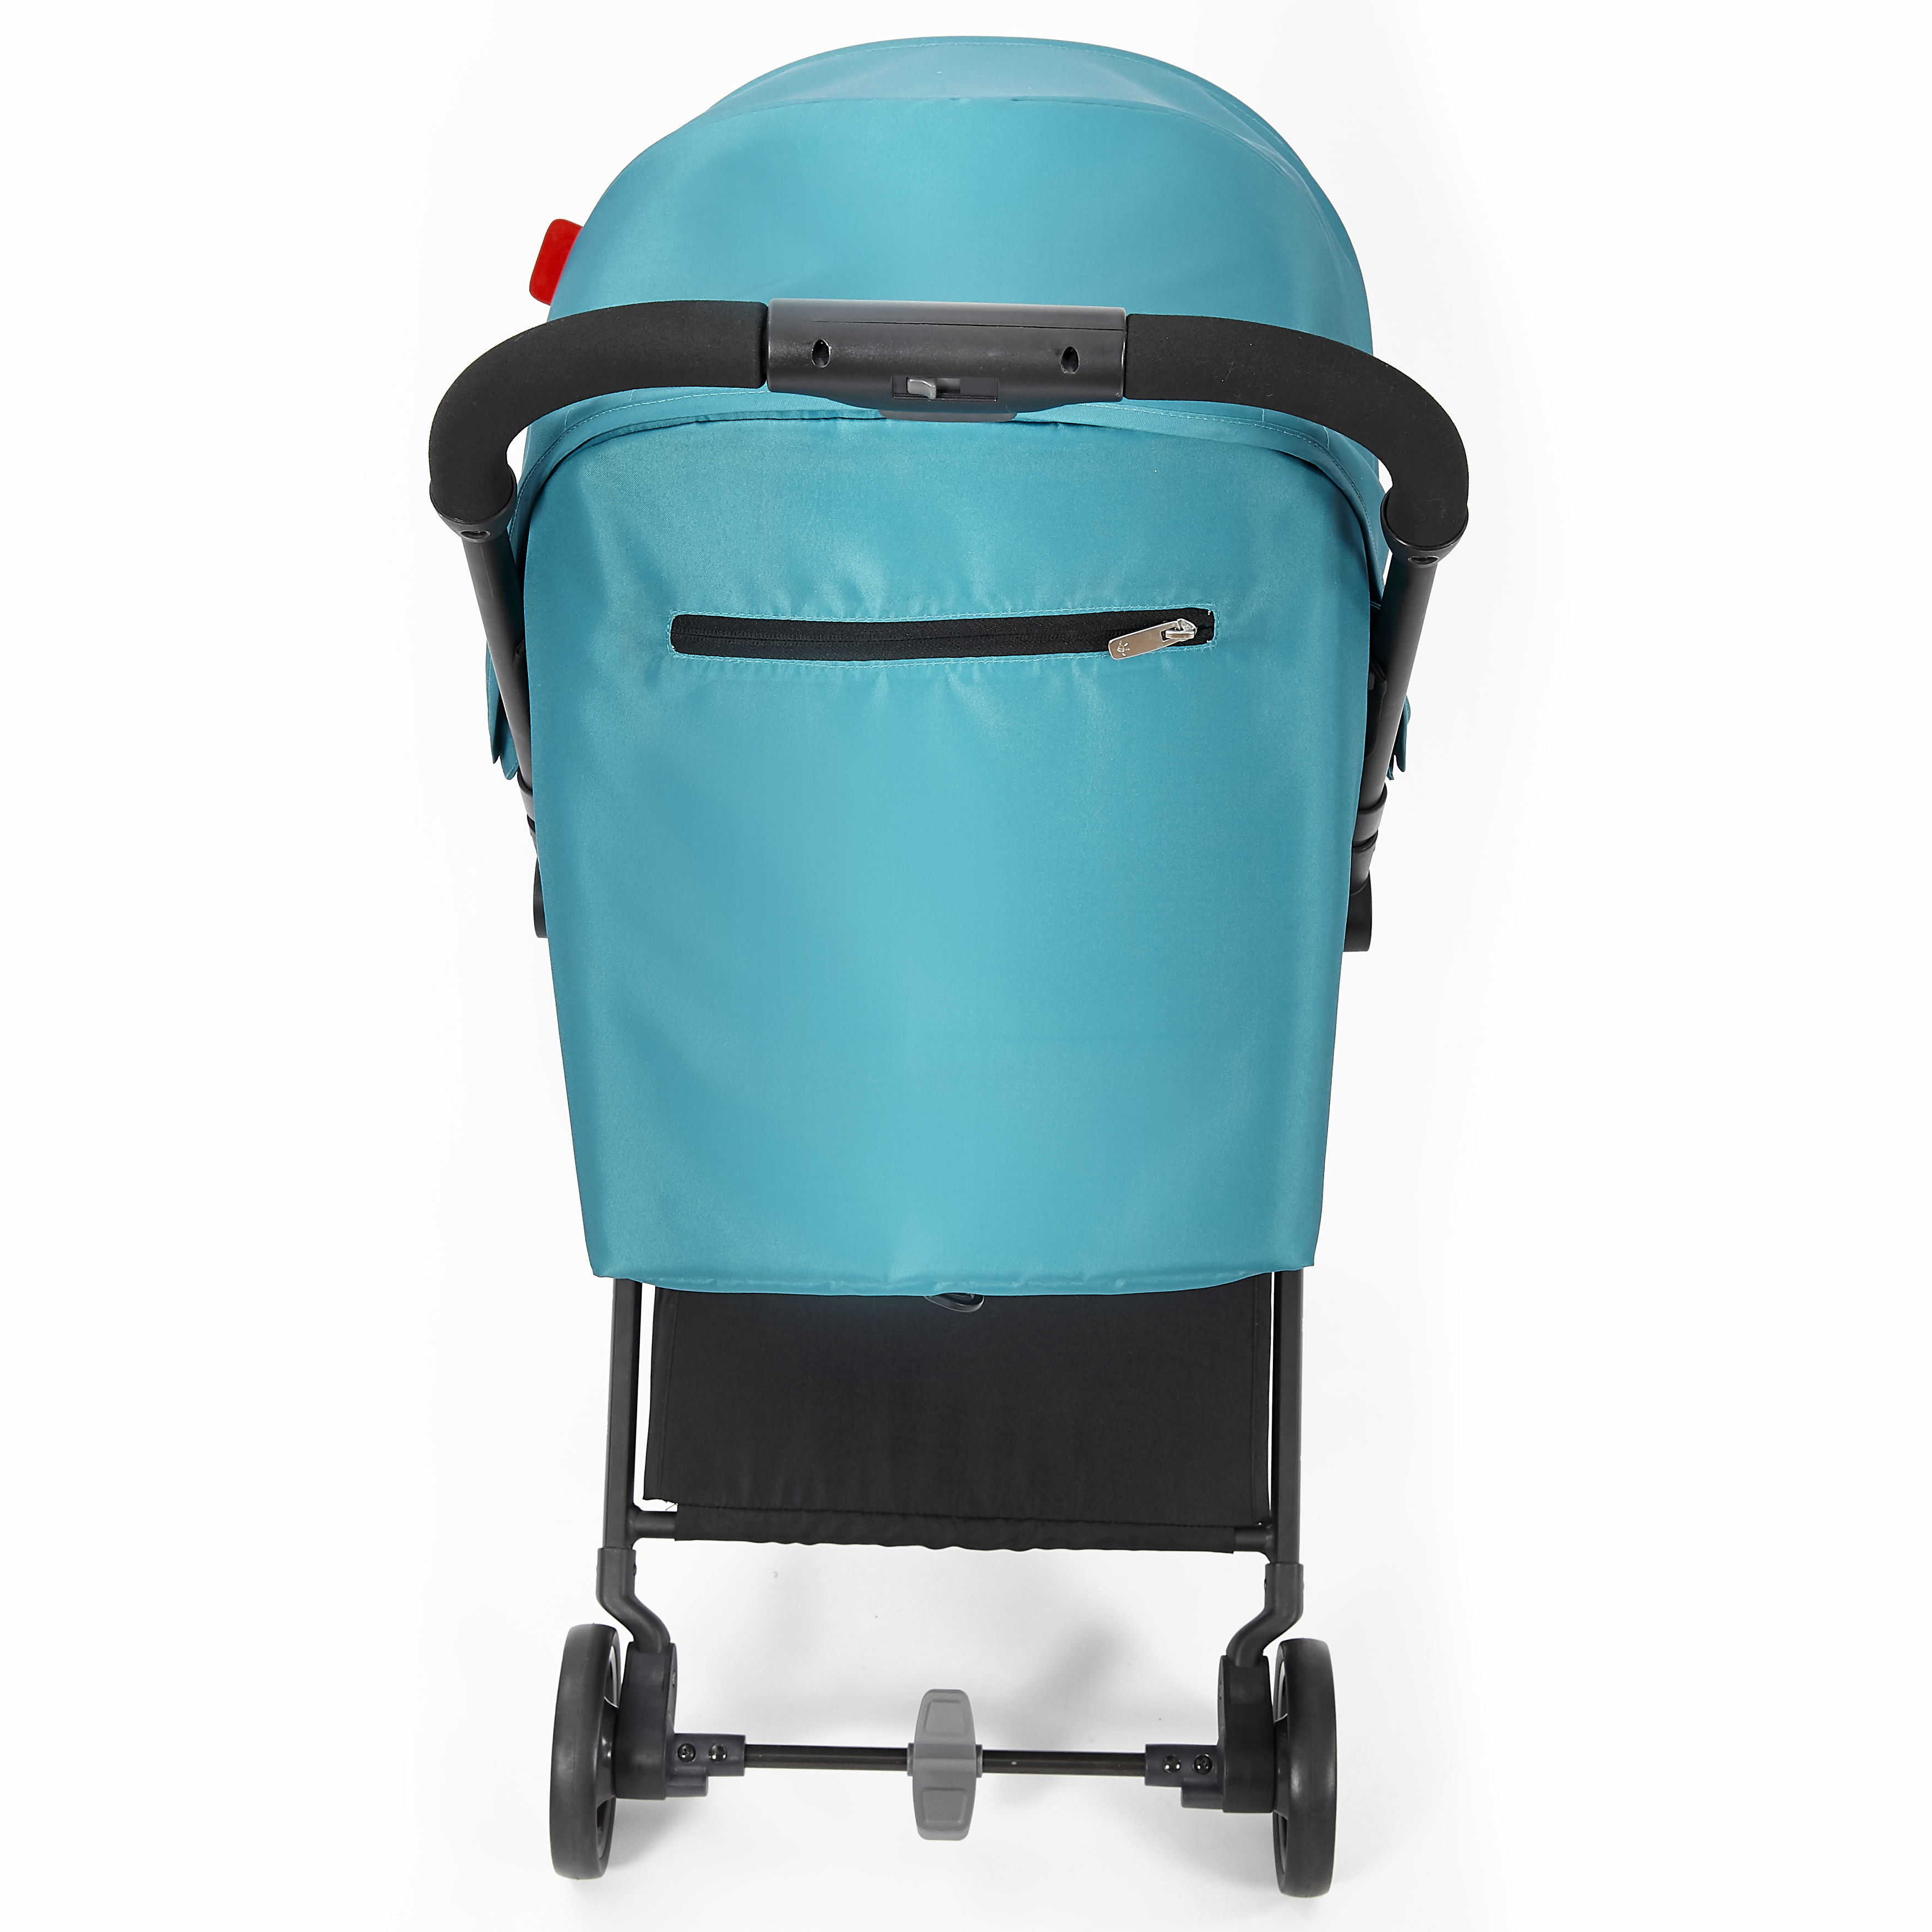 Diono Traverze Plus Lightweight Compact Stroller with Easy Fold, Teal - image 3 of 9